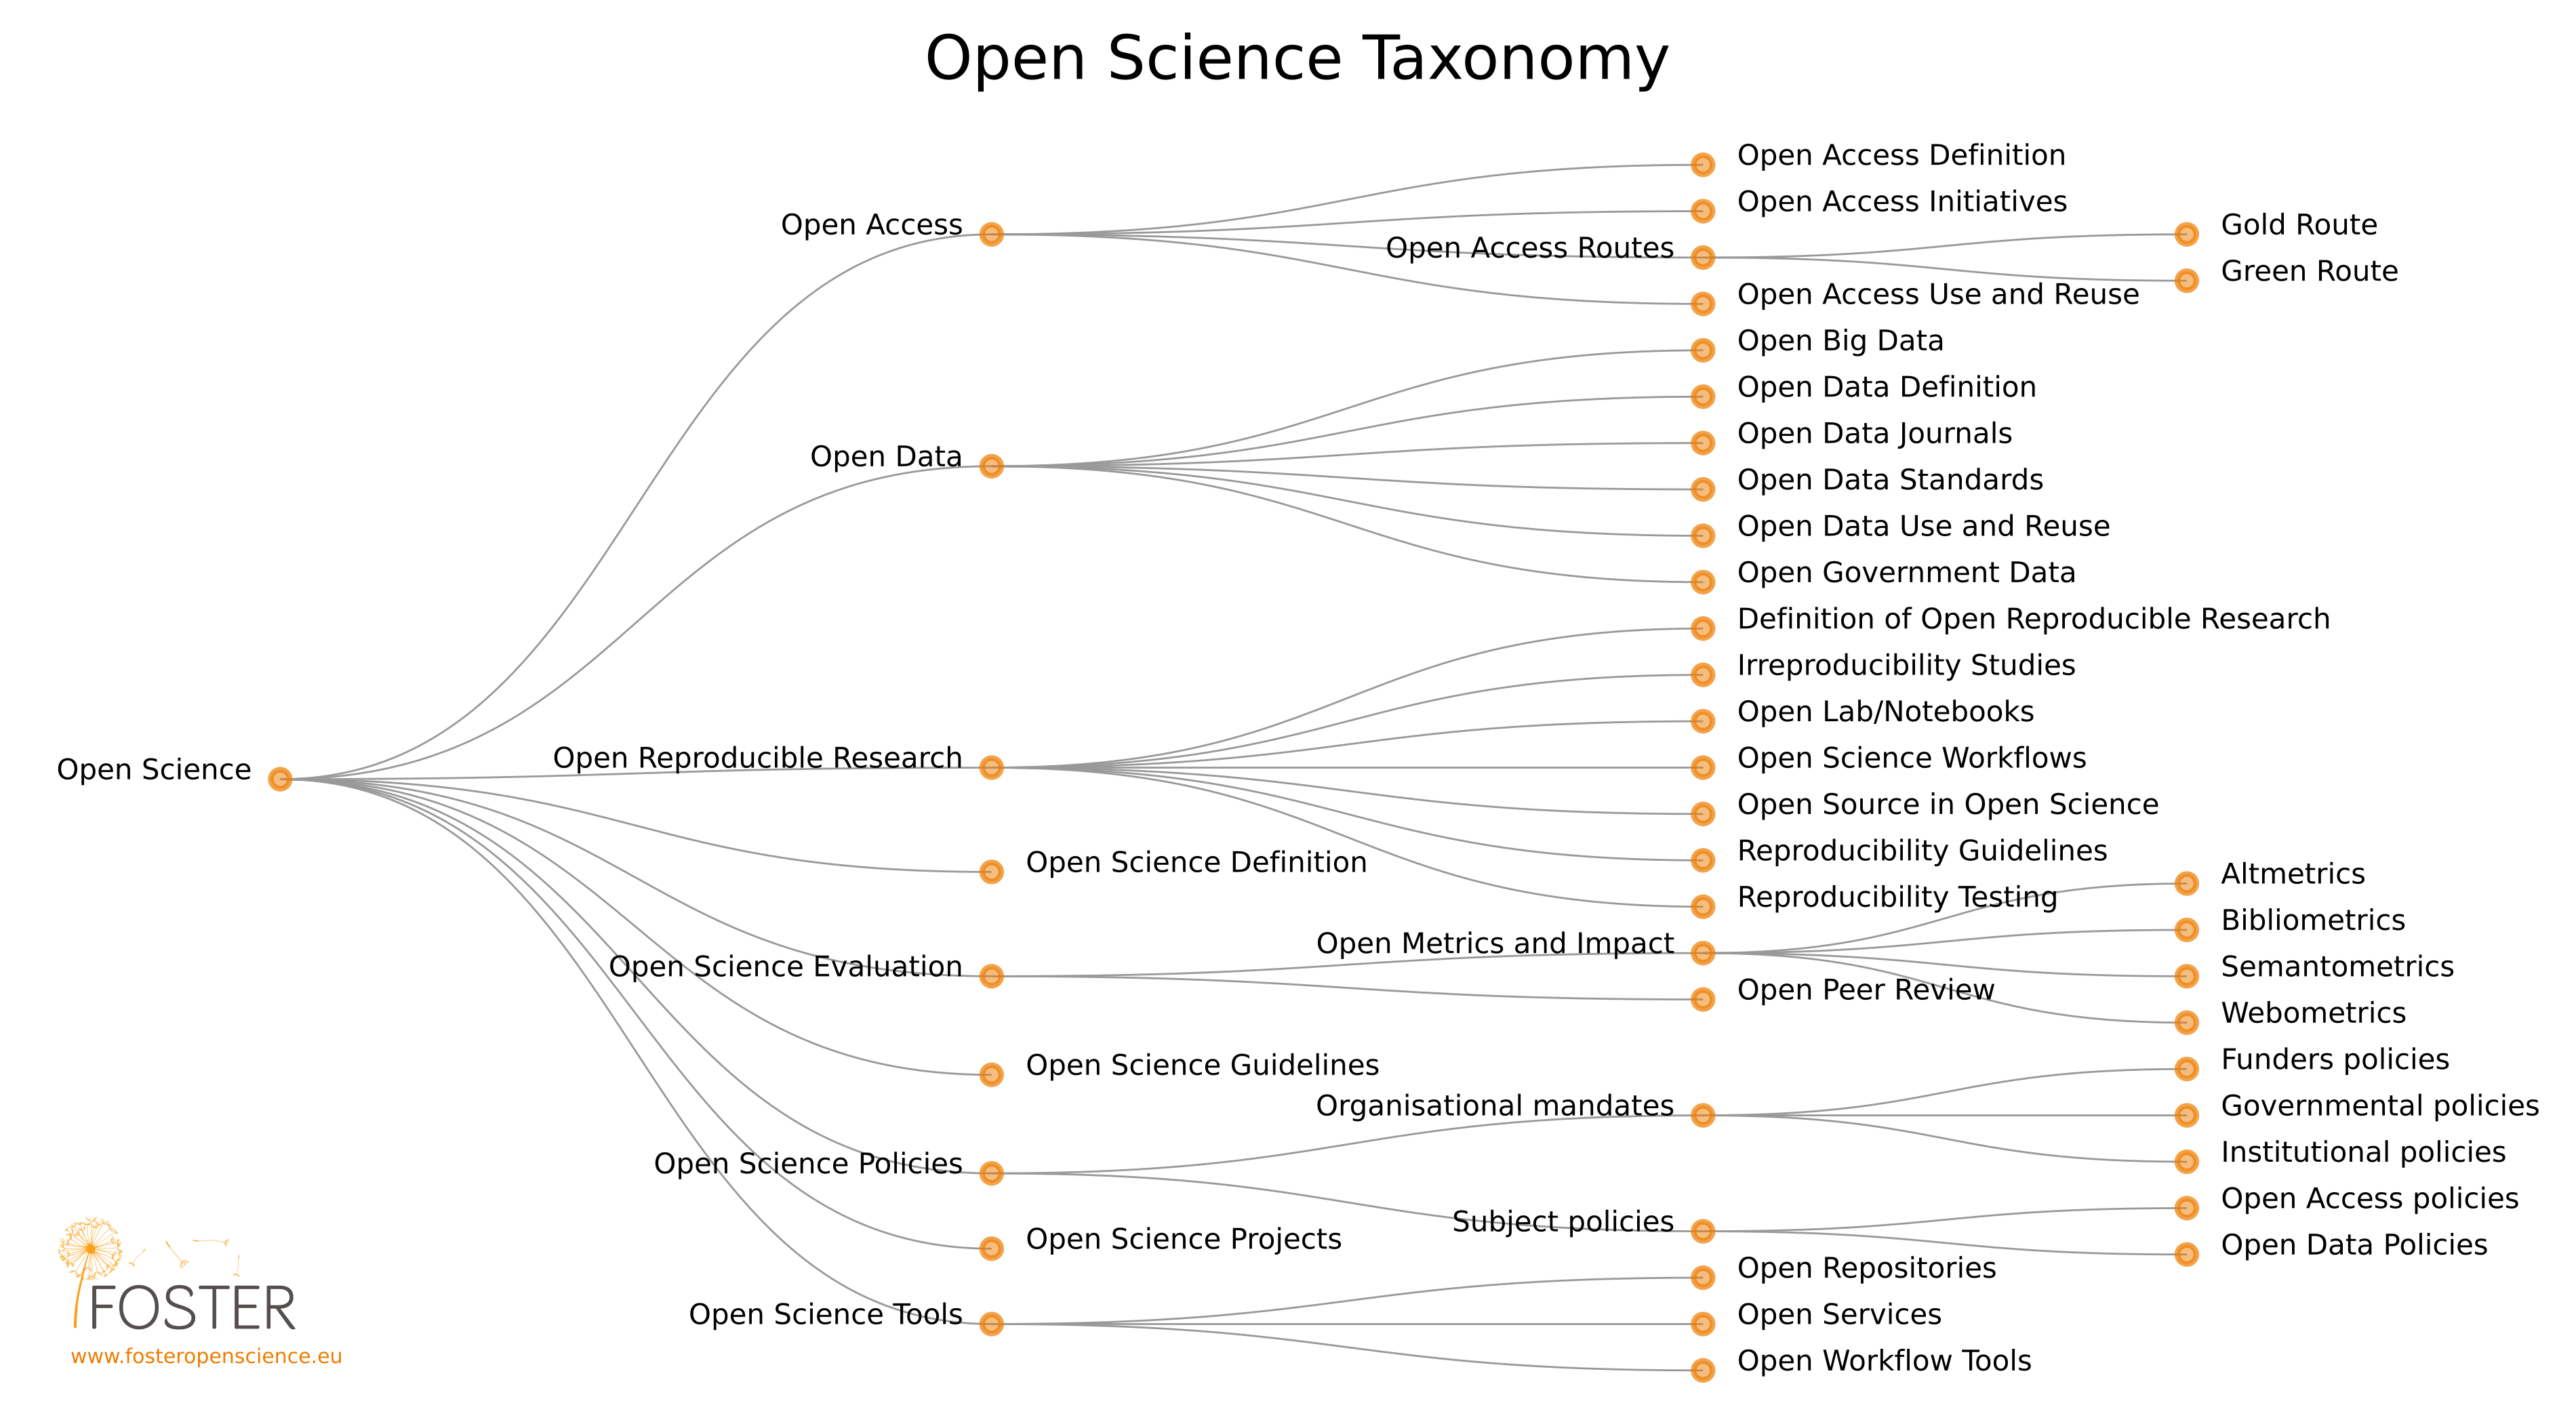 https://commons.wikimedia.org/wiki/File:Os_taxonomy.png